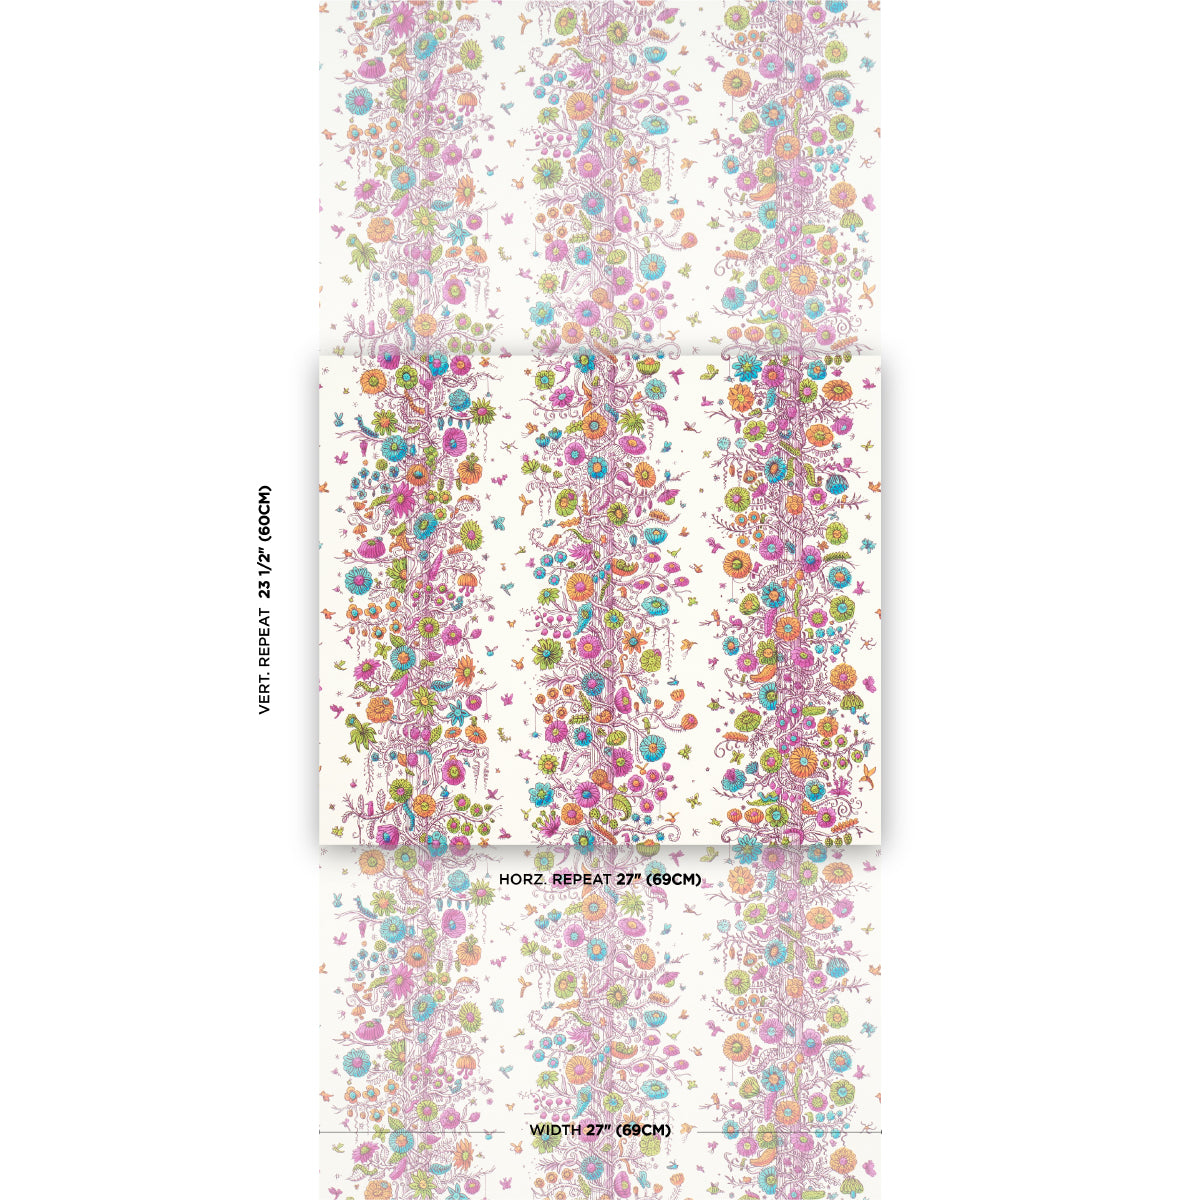 EDWARD STEED'S TOWERS OF FLOWERS | MULTICOLOR BURST